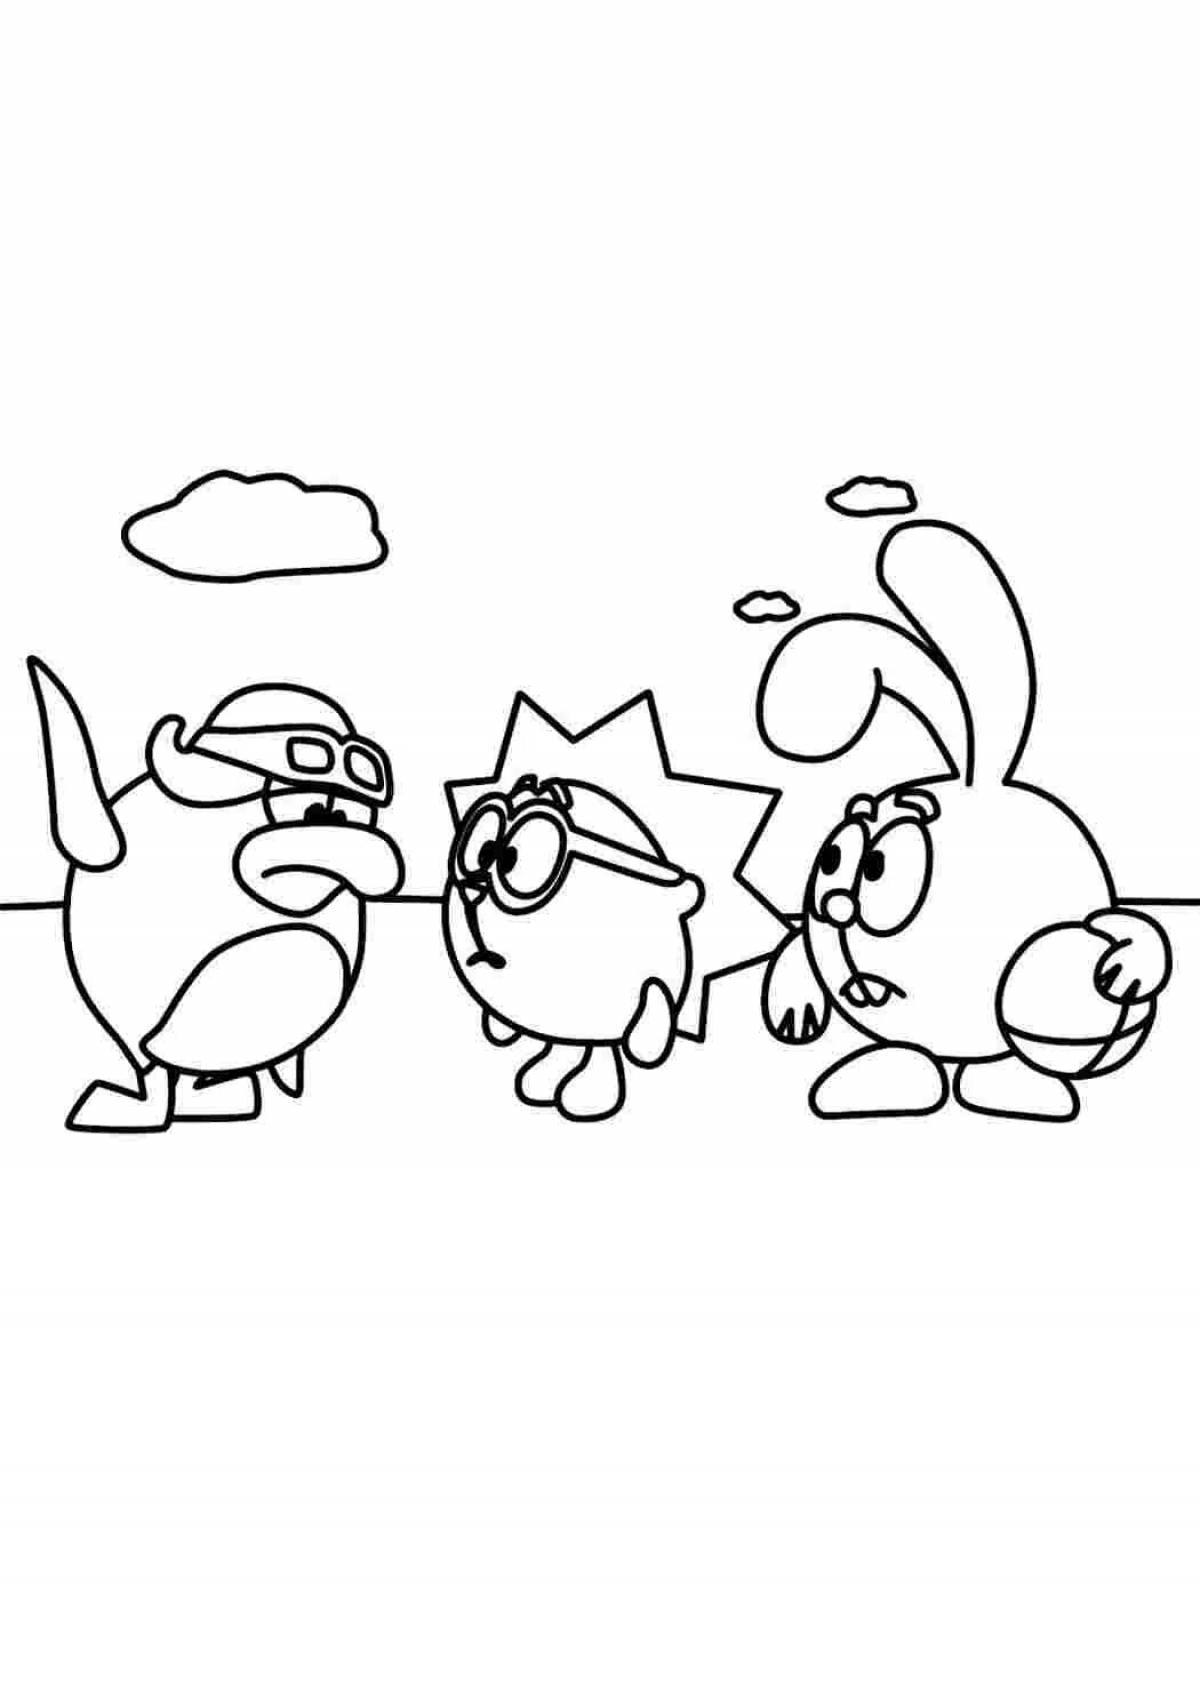 Cool smeshariki coloring pages